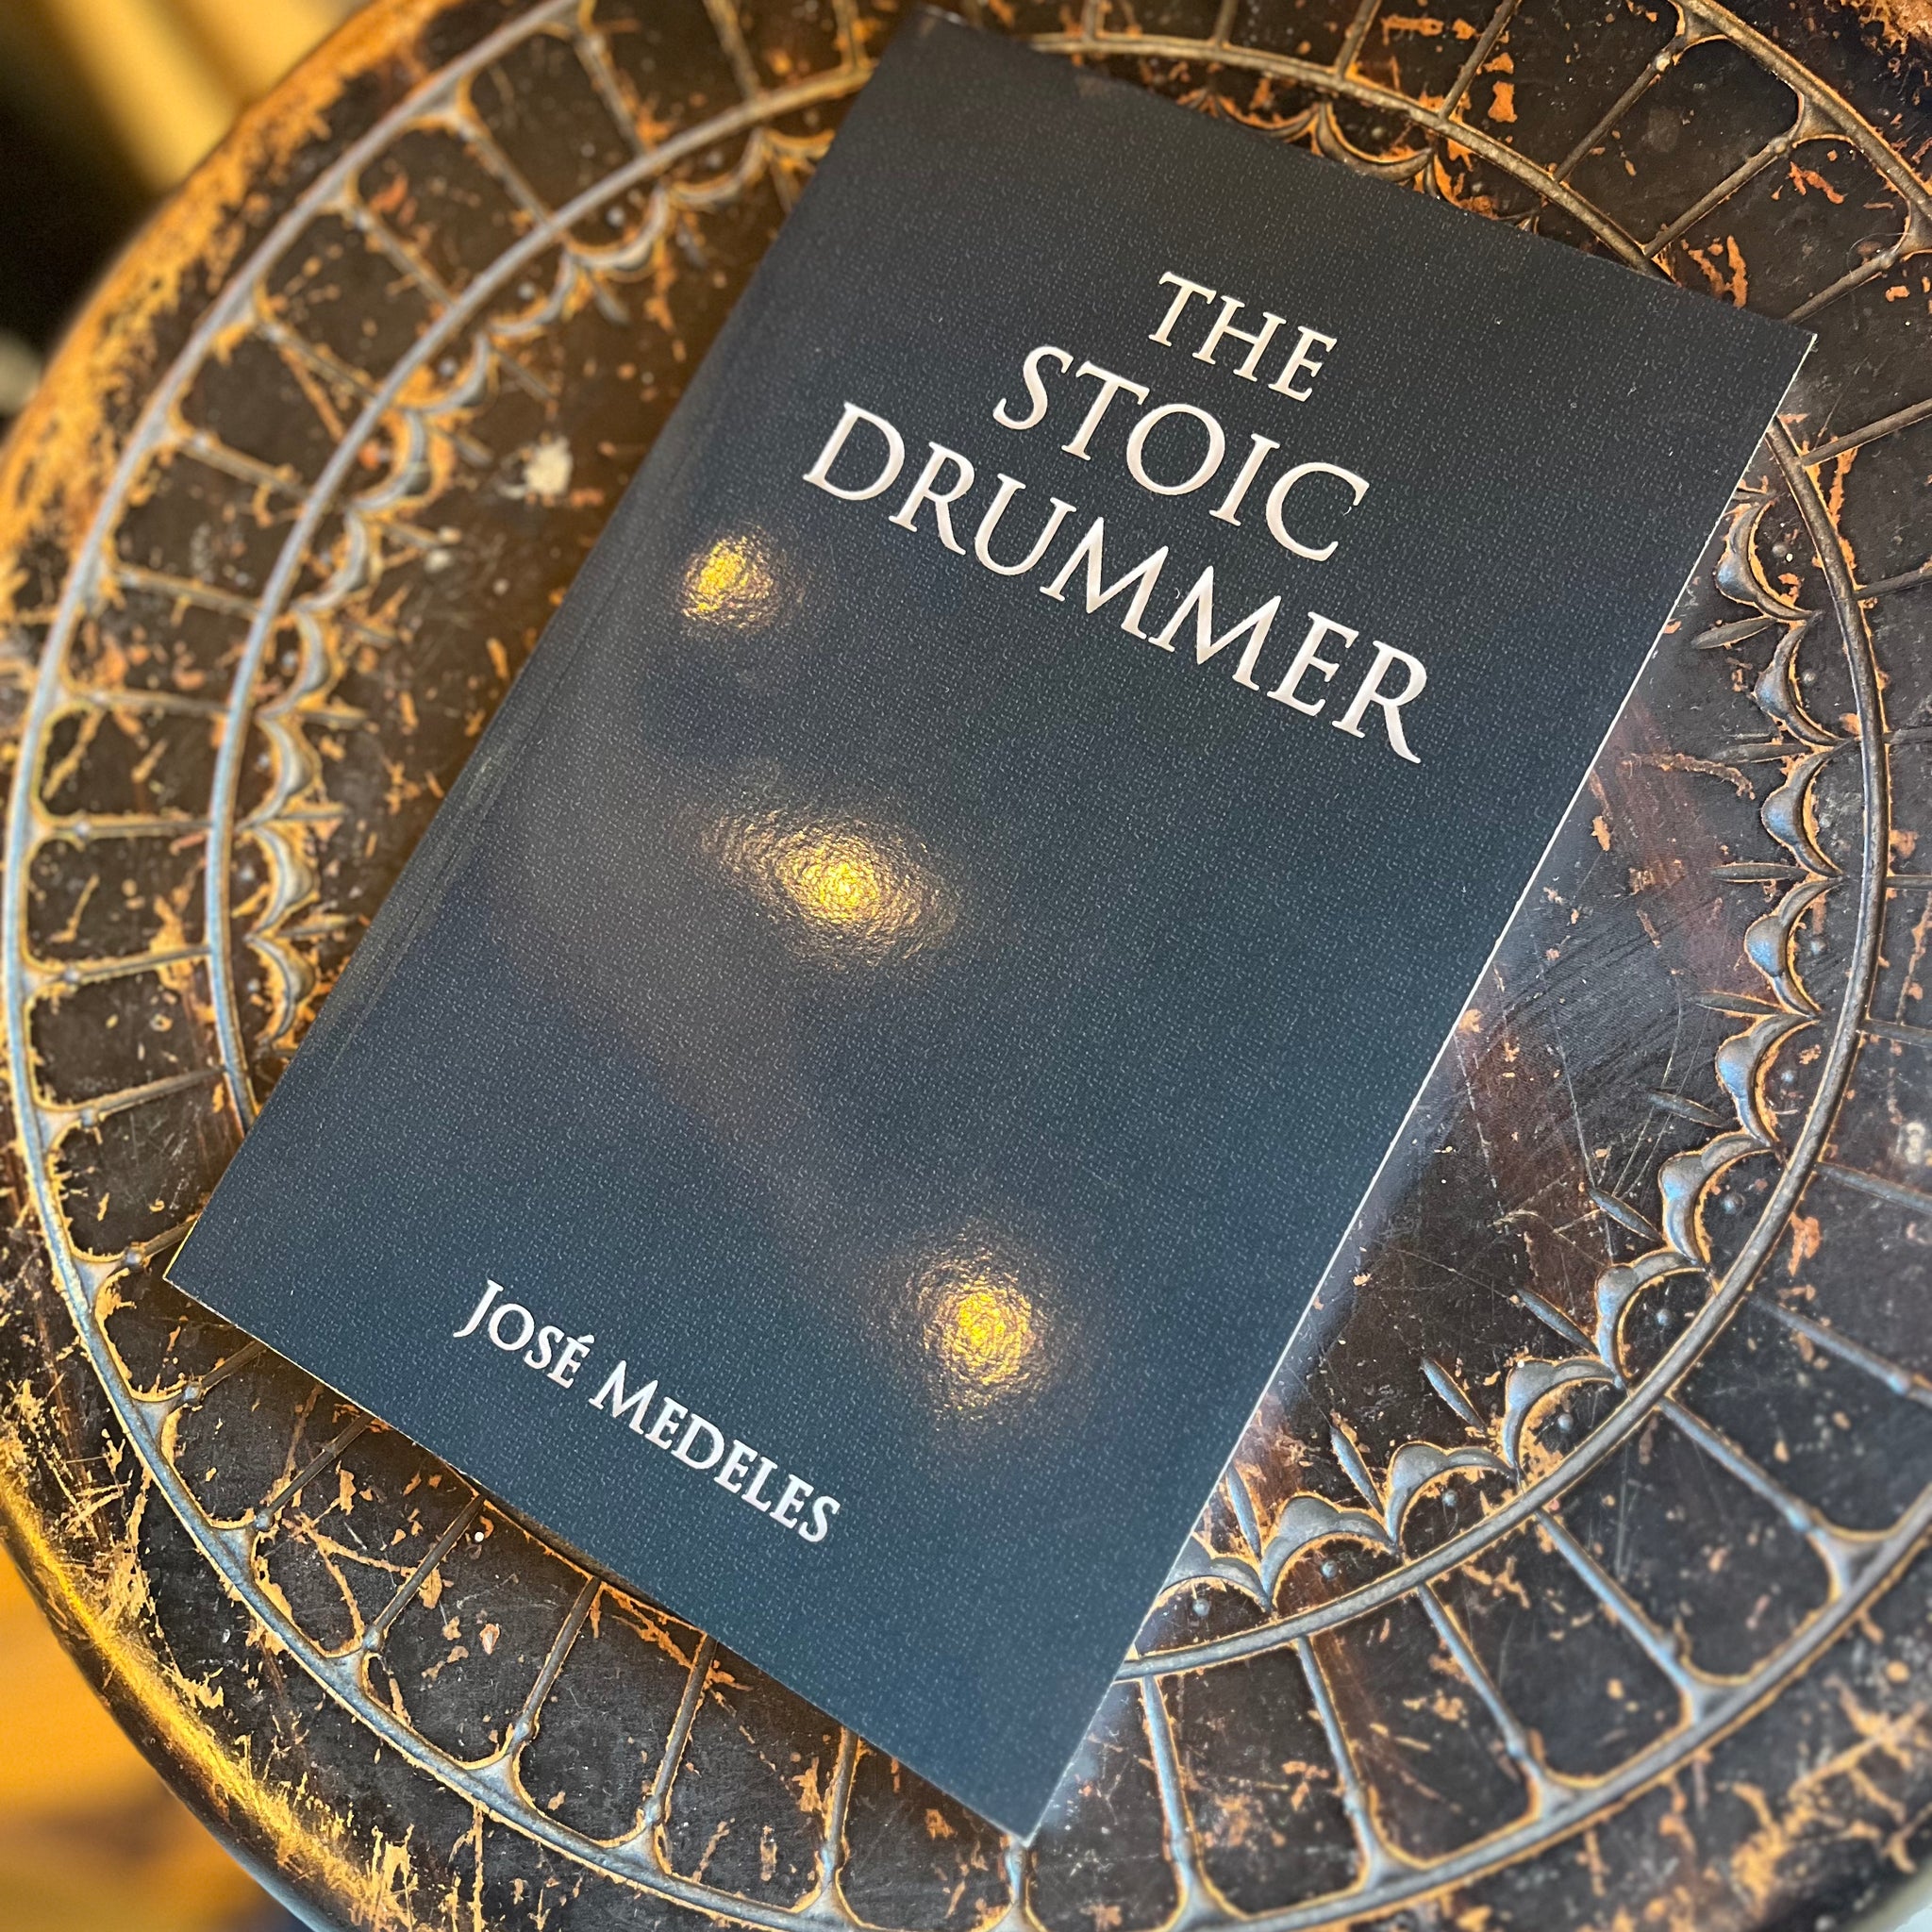 The Stoic Drummer - by José Medeles